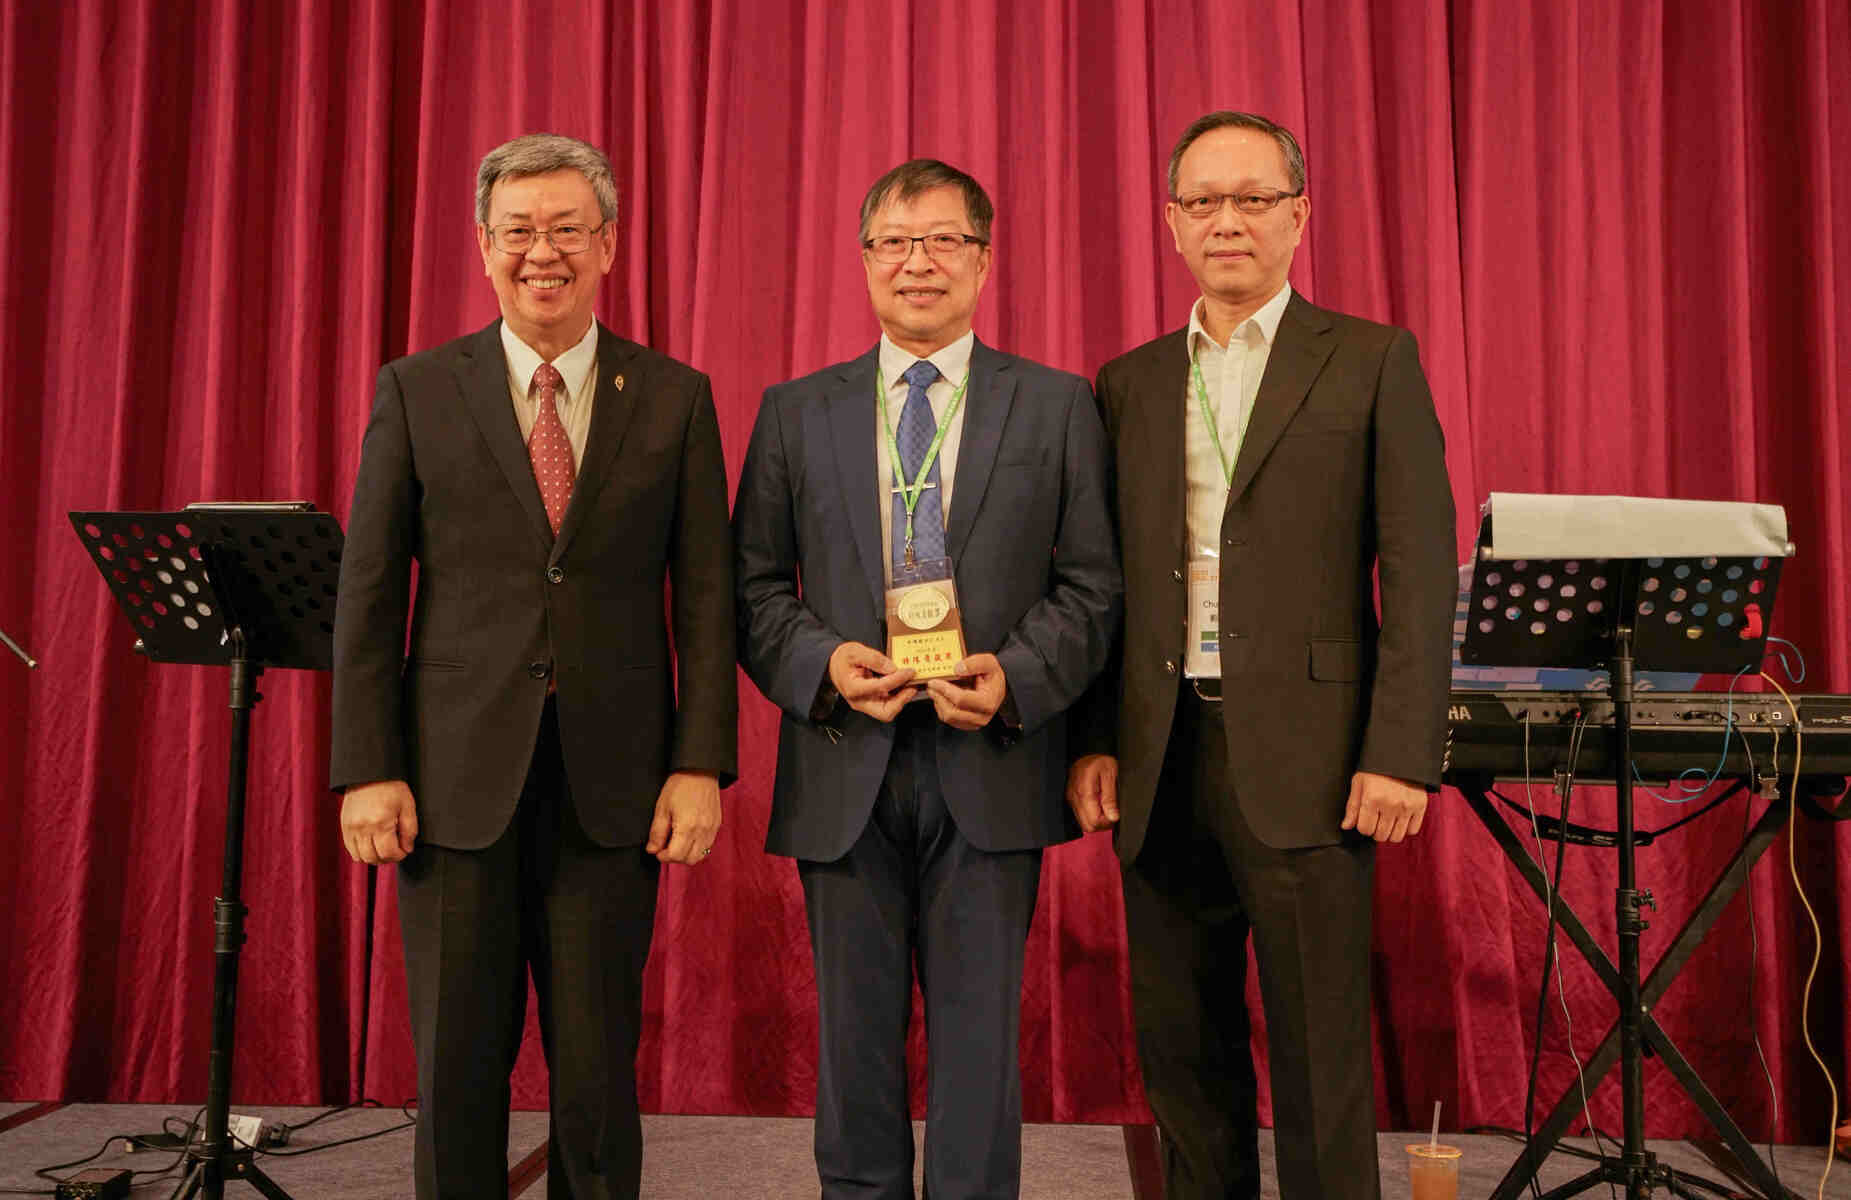 Dr. Ming-Lung Yu (middle), Dean of the College of Medicine and Senior Vice President at NSYSU, was awarded the 2023 Special Contribution Award by the TASL. (Credit: TASL)